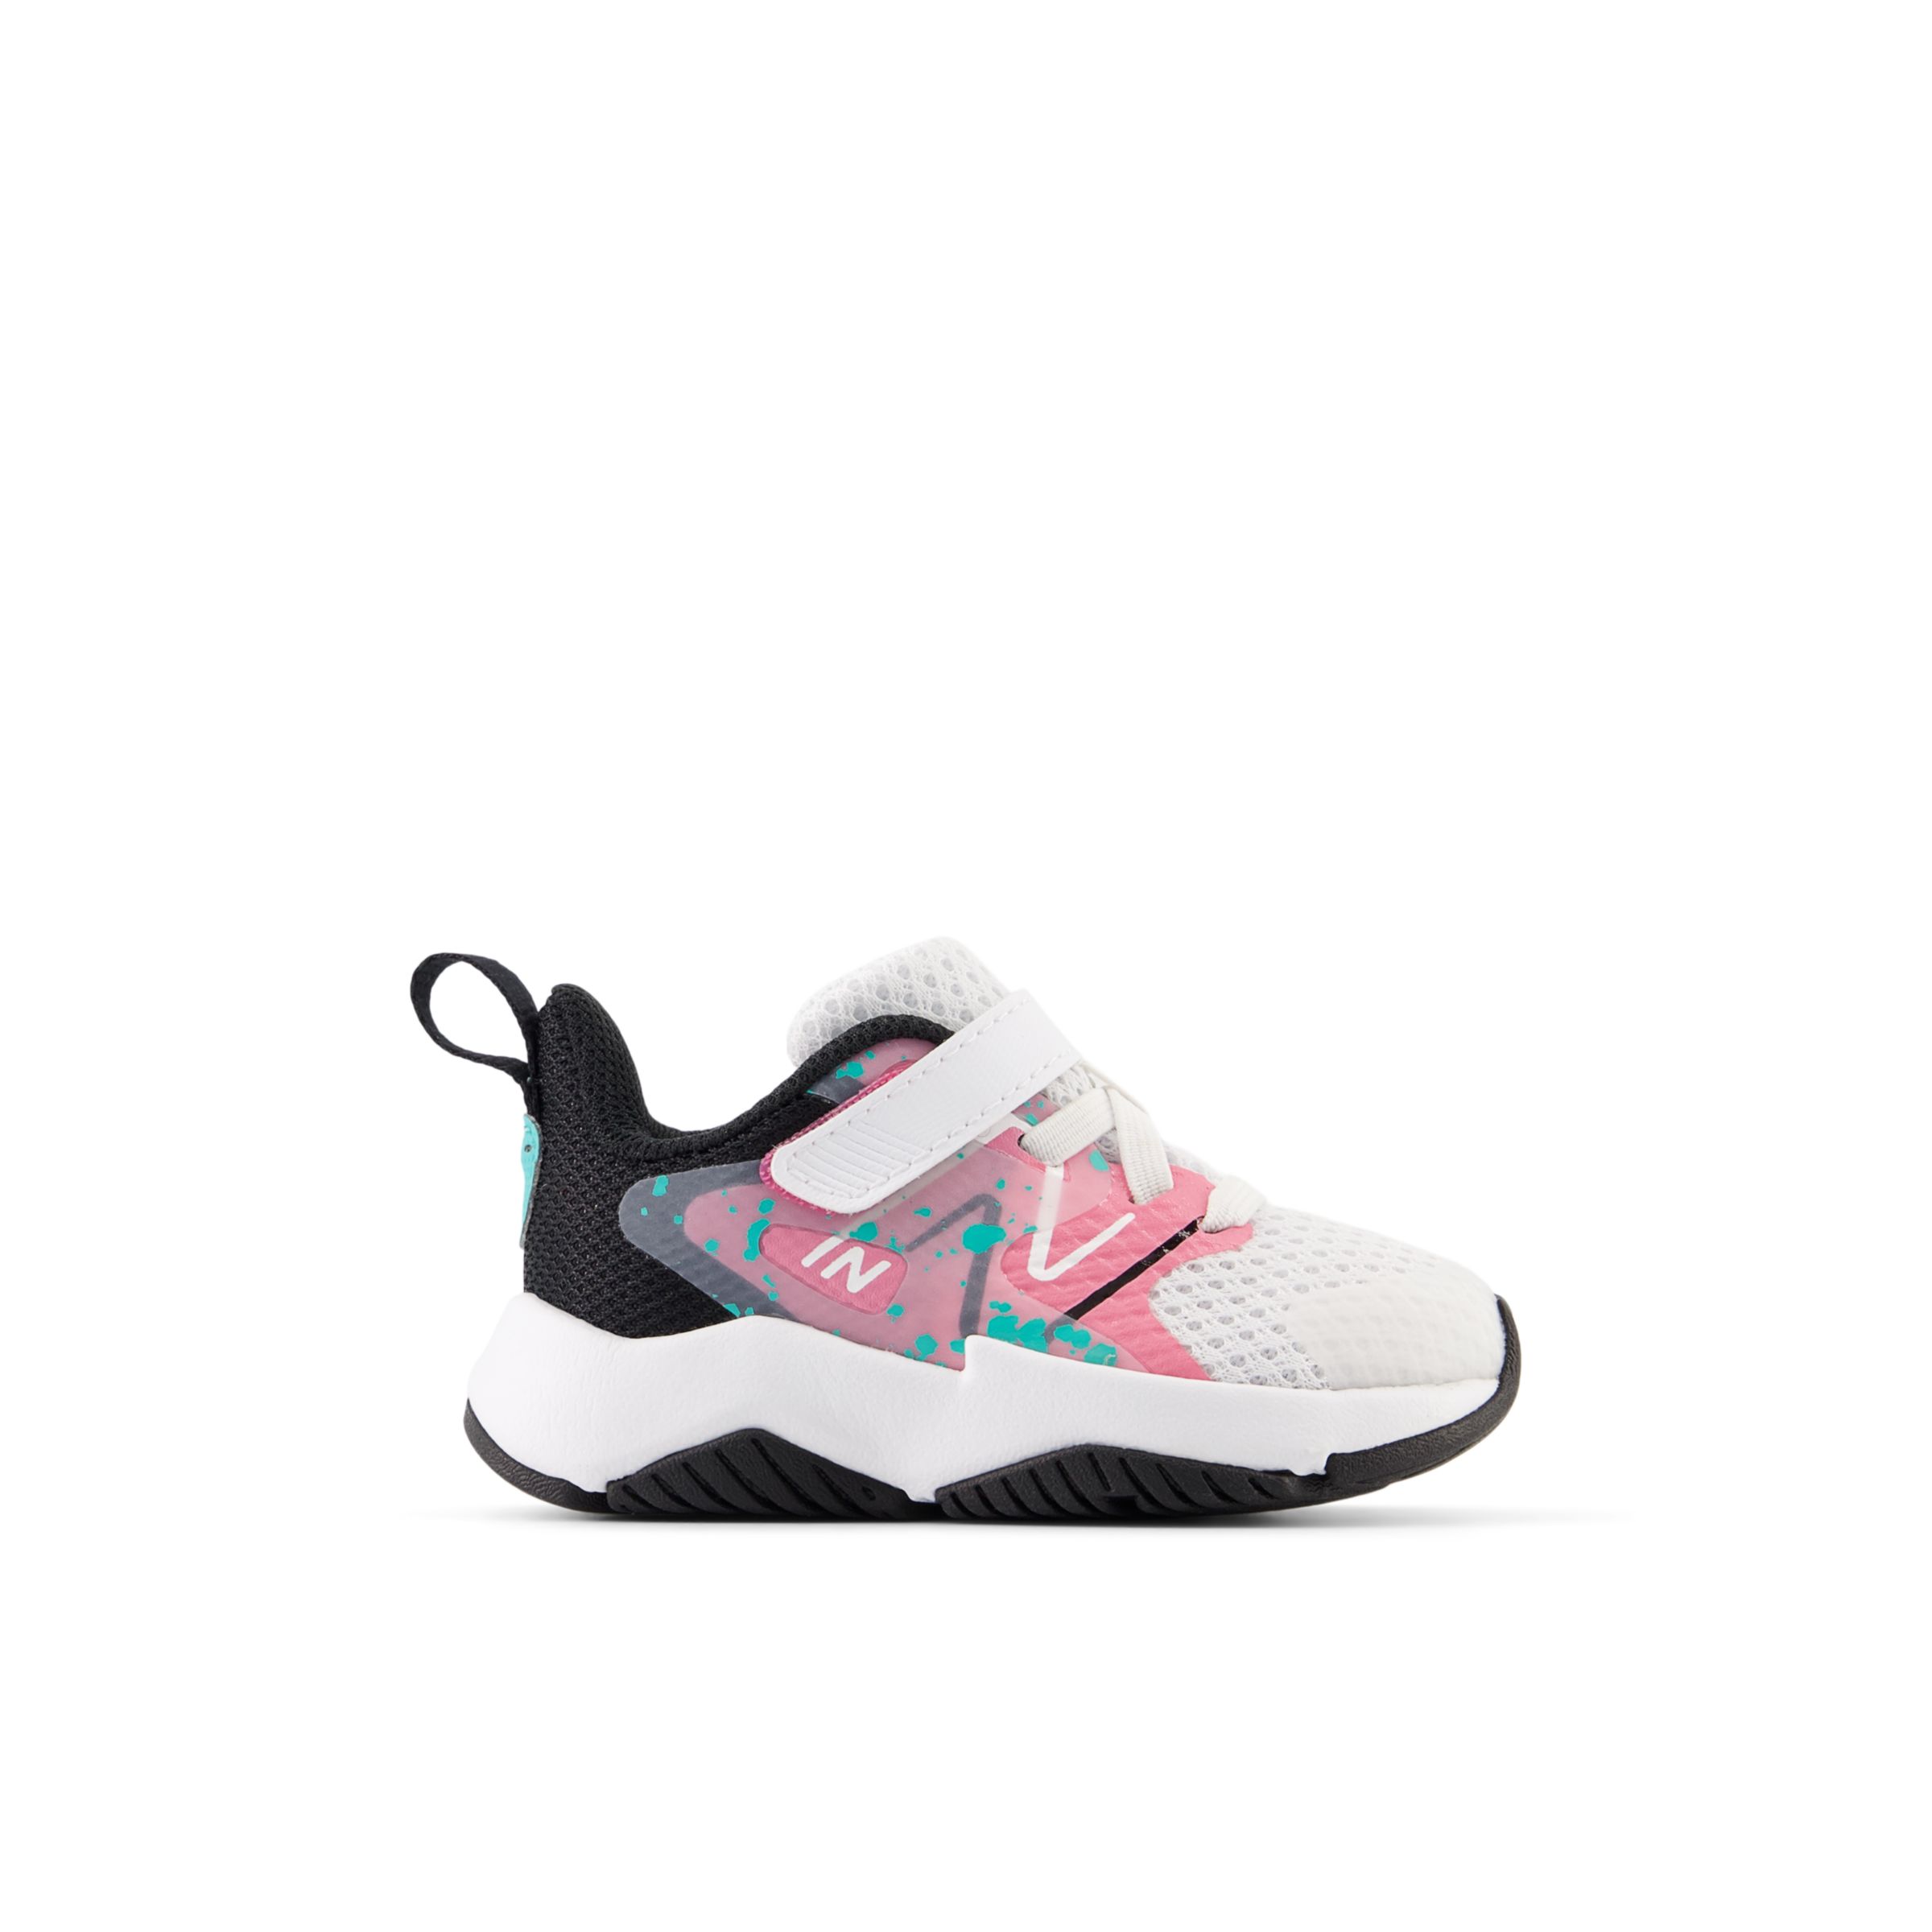 

New Balance Kids' Rave Run v2 Bungee Lace with Top Strap White/Pink/Black - White/Pink/Black